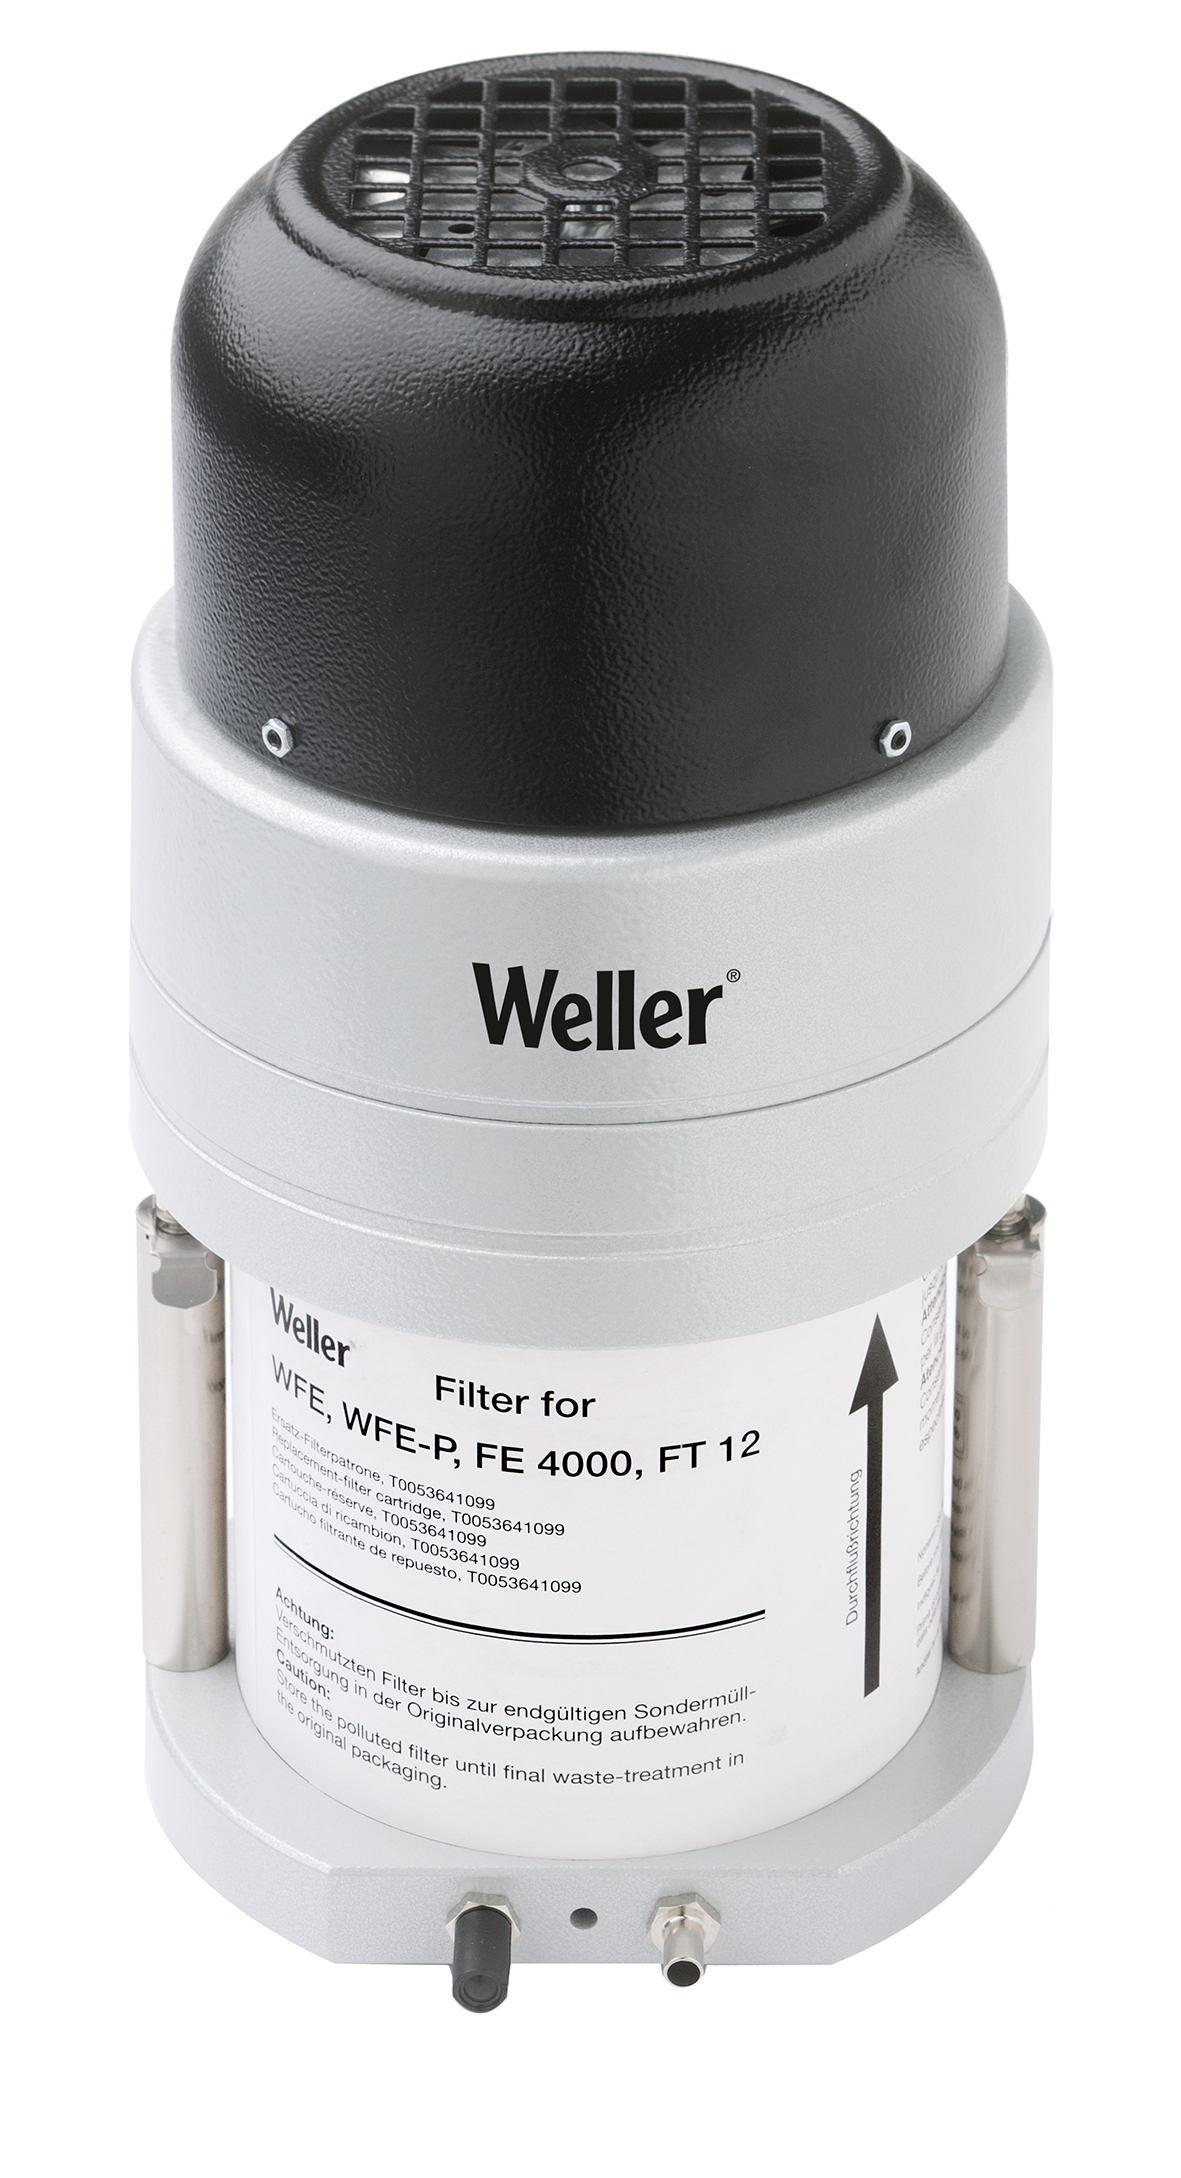 WELLER WFE P Extraction unit